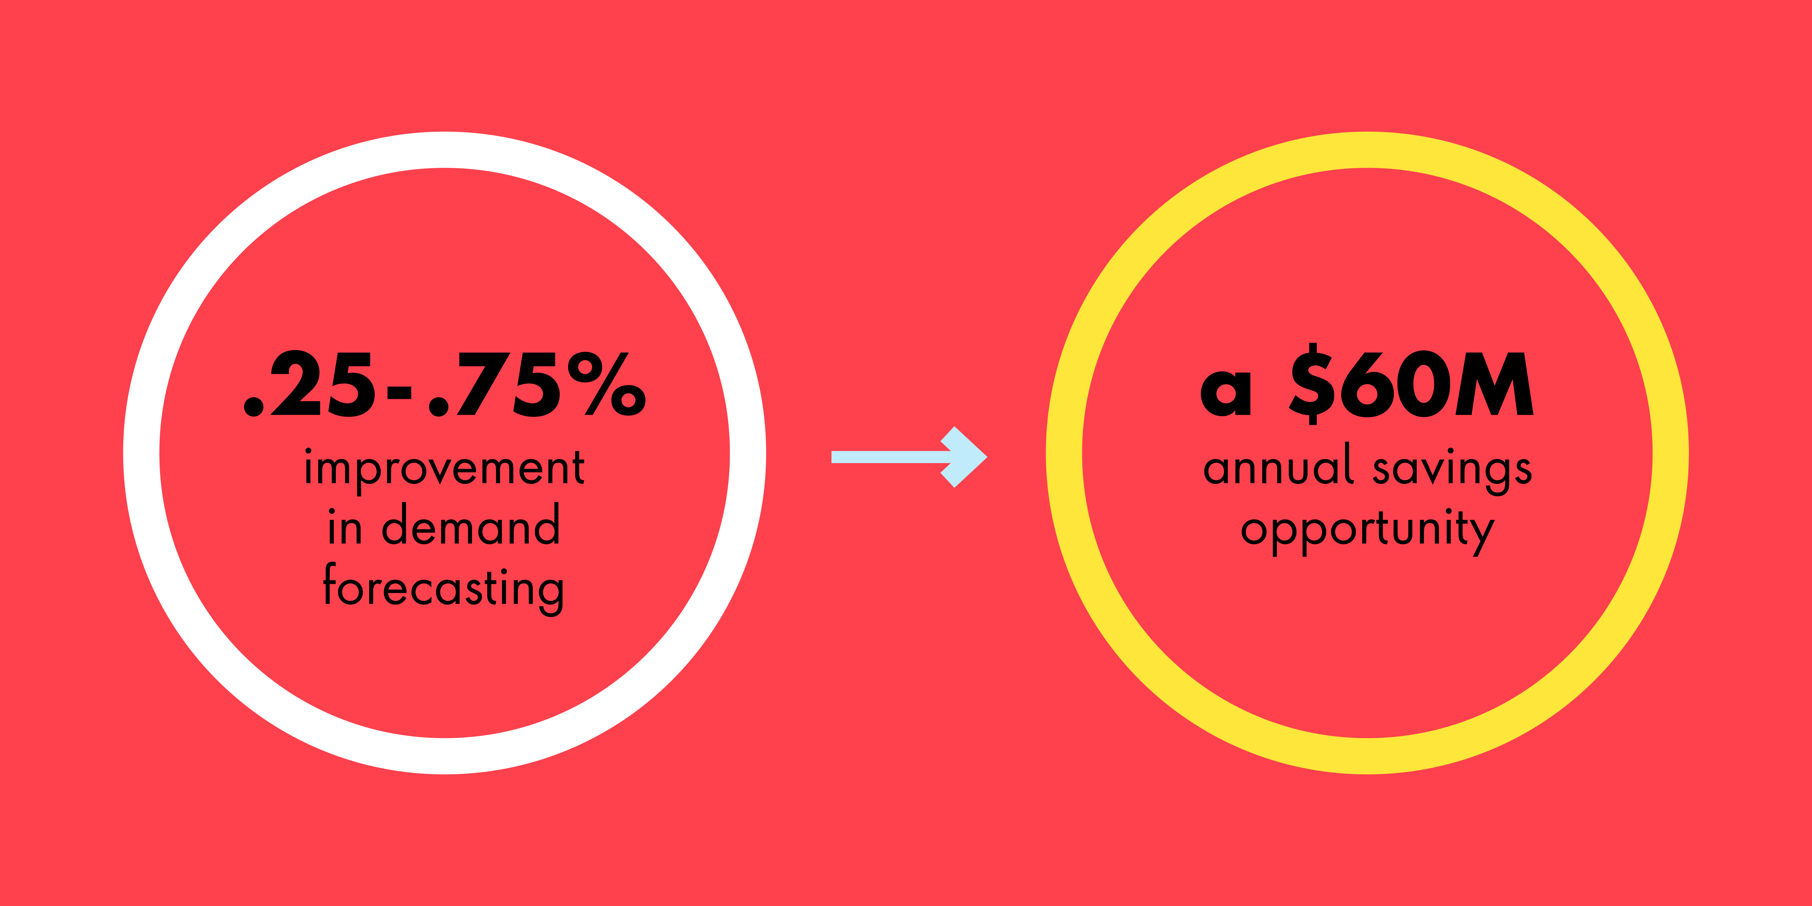 .25-.75% improvement in demand forecasting -> a $60M annual savings opportunity 